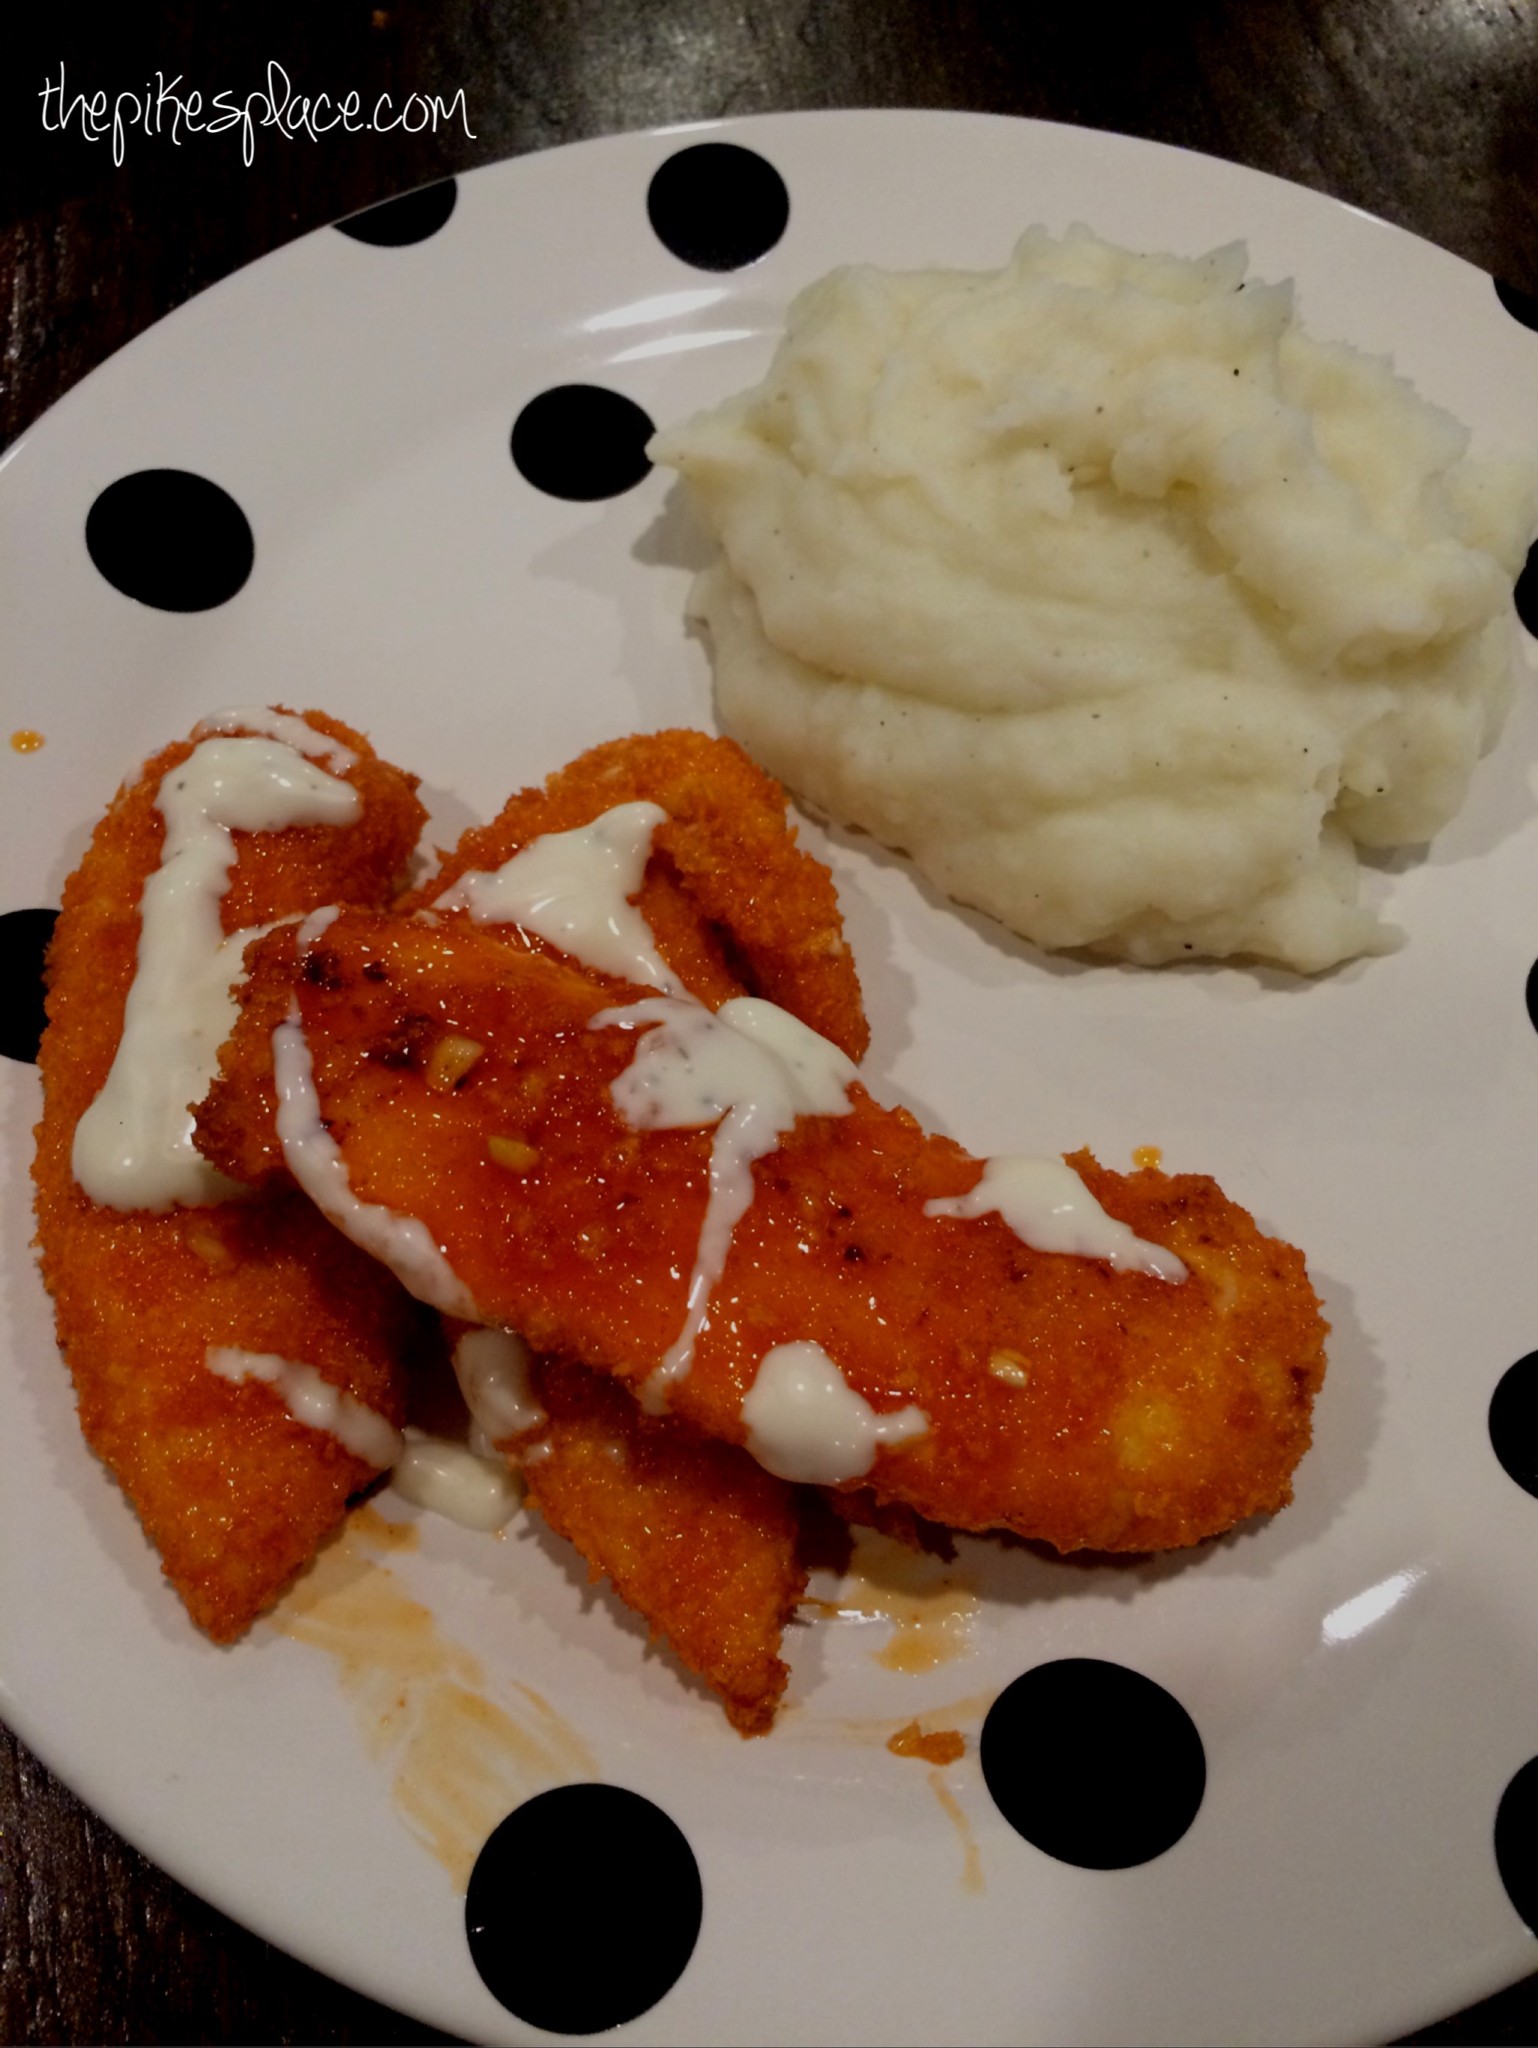 Baked Honey Buffalo Chicken Tenders. Easy Dinner Recipe. If you like buffalo swings, you will love this healthier version. Detroit style sauce is sticky, sweet and spicy!